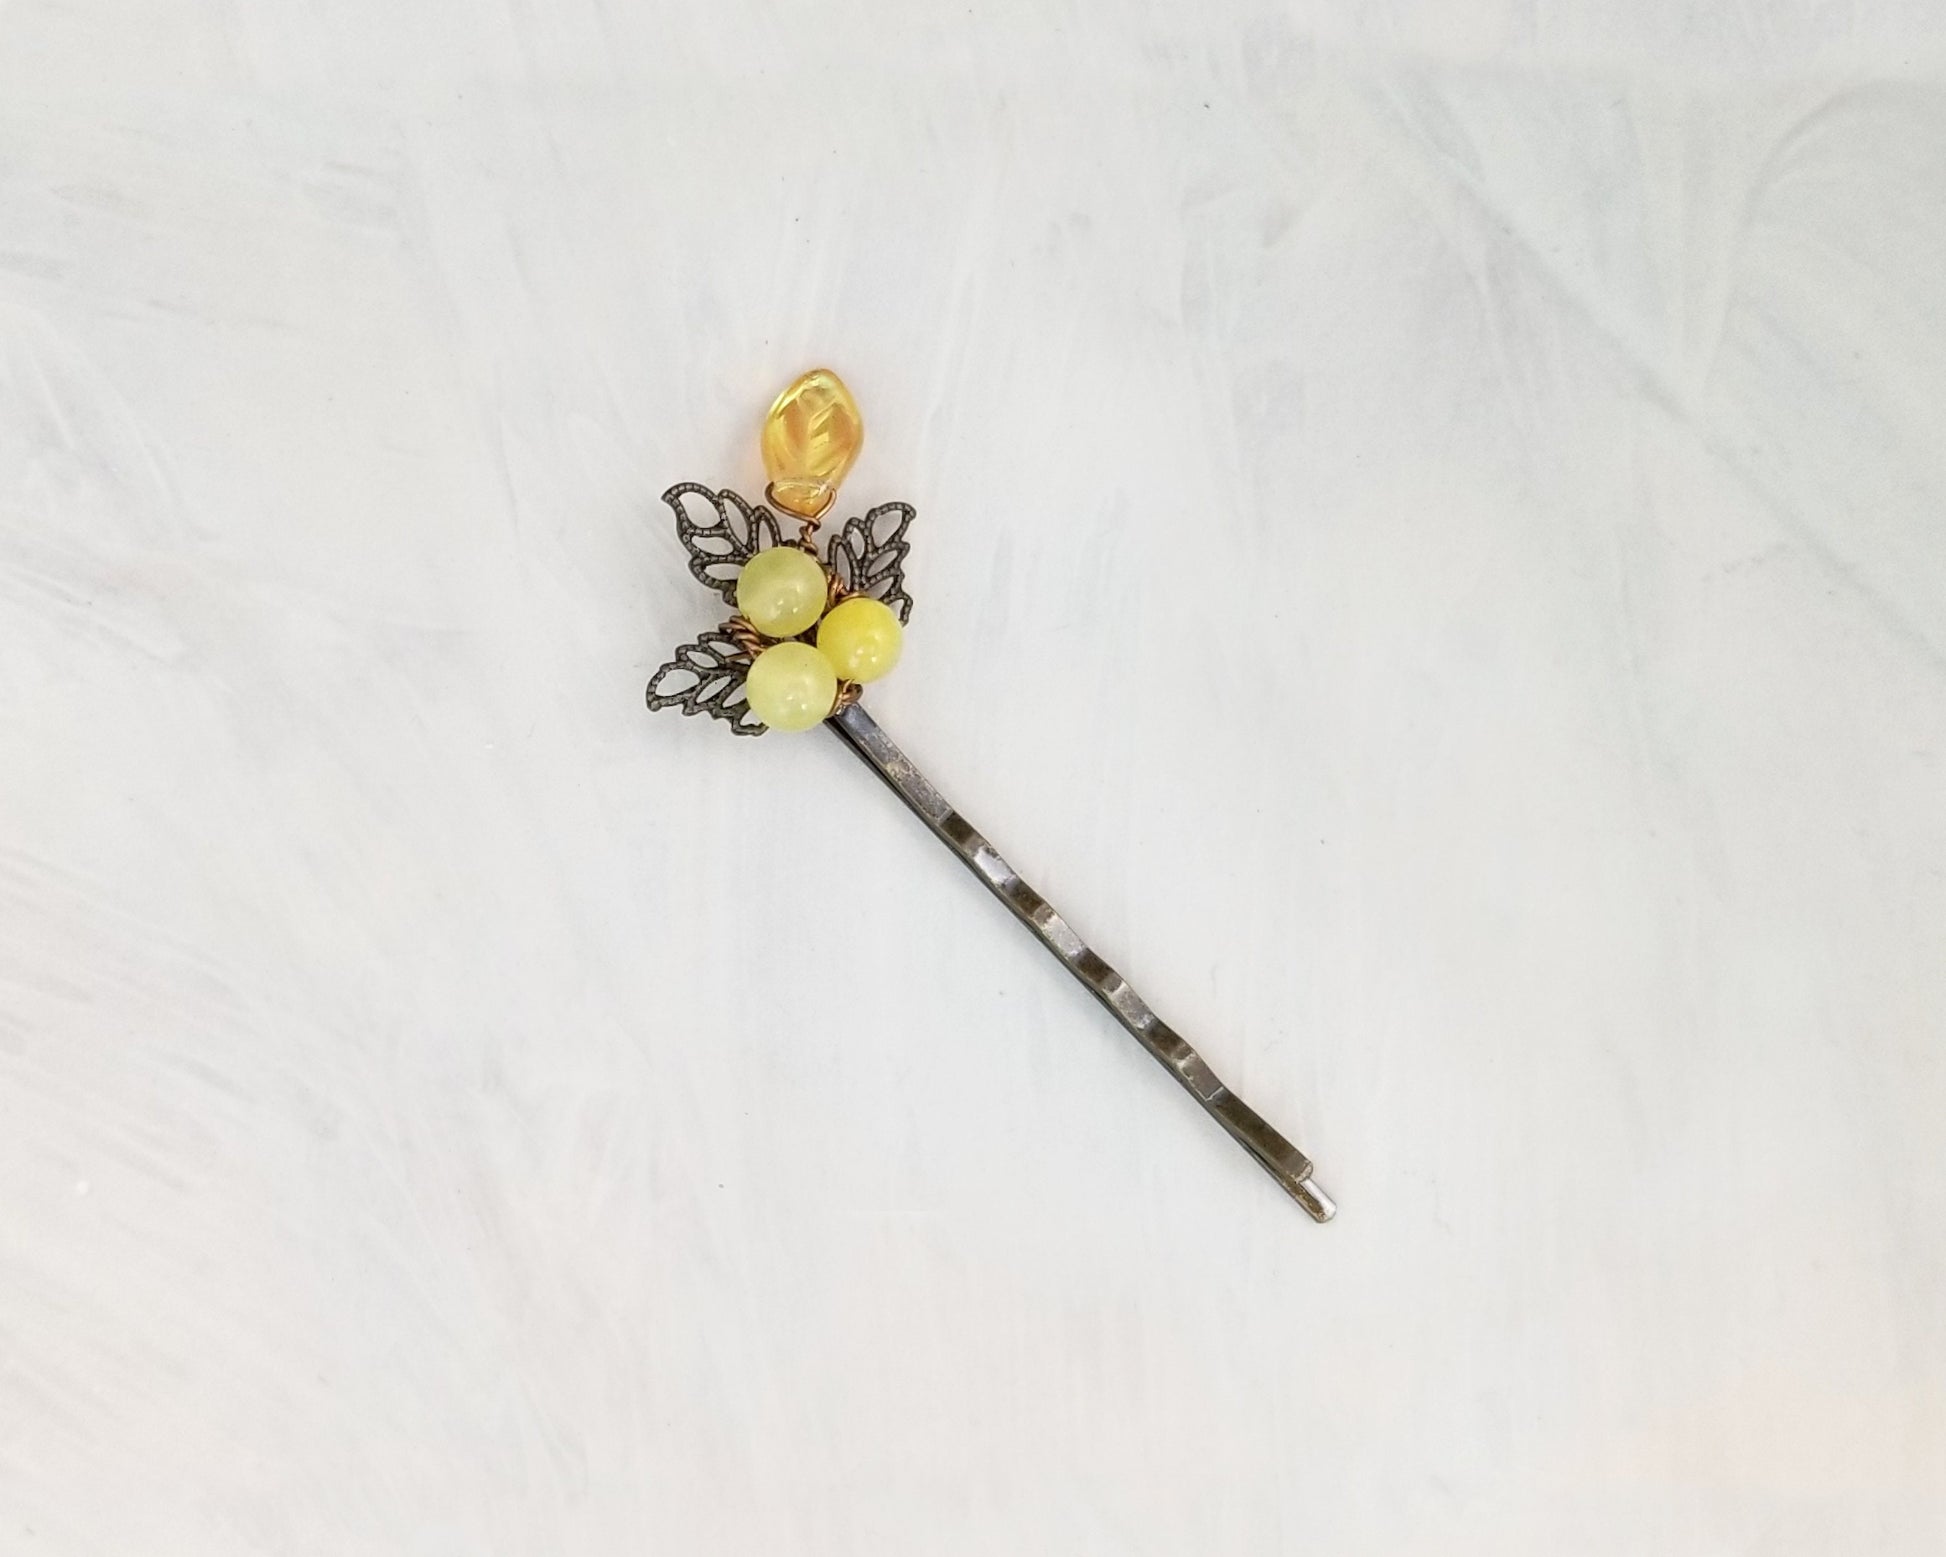 Wire Wrapped Beaded Bobby Pin / Hair Pin in Yellow, Bridesmaid, Wedding, Floral, Garden, Party, Boho, Bohemian, Choice of Colors and Metals